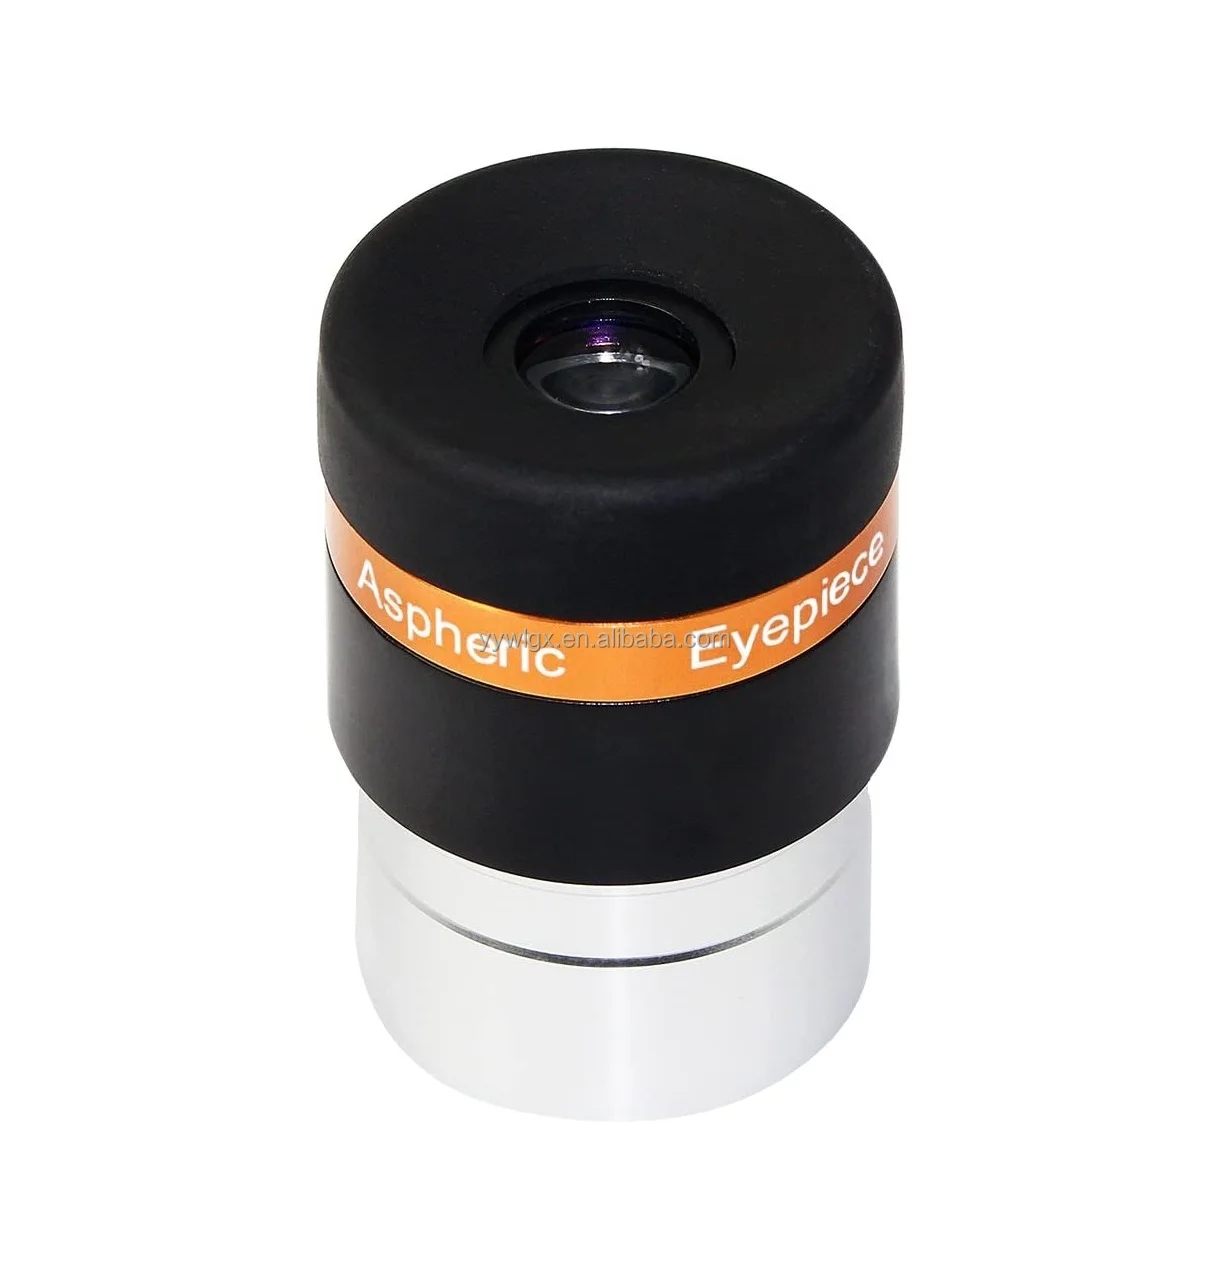 Astronomic Telescope Lens 6mm Telescope Eyepieces Fully Coated Lens Telescope Accessories Kit Wide Angle for 1.25 inches